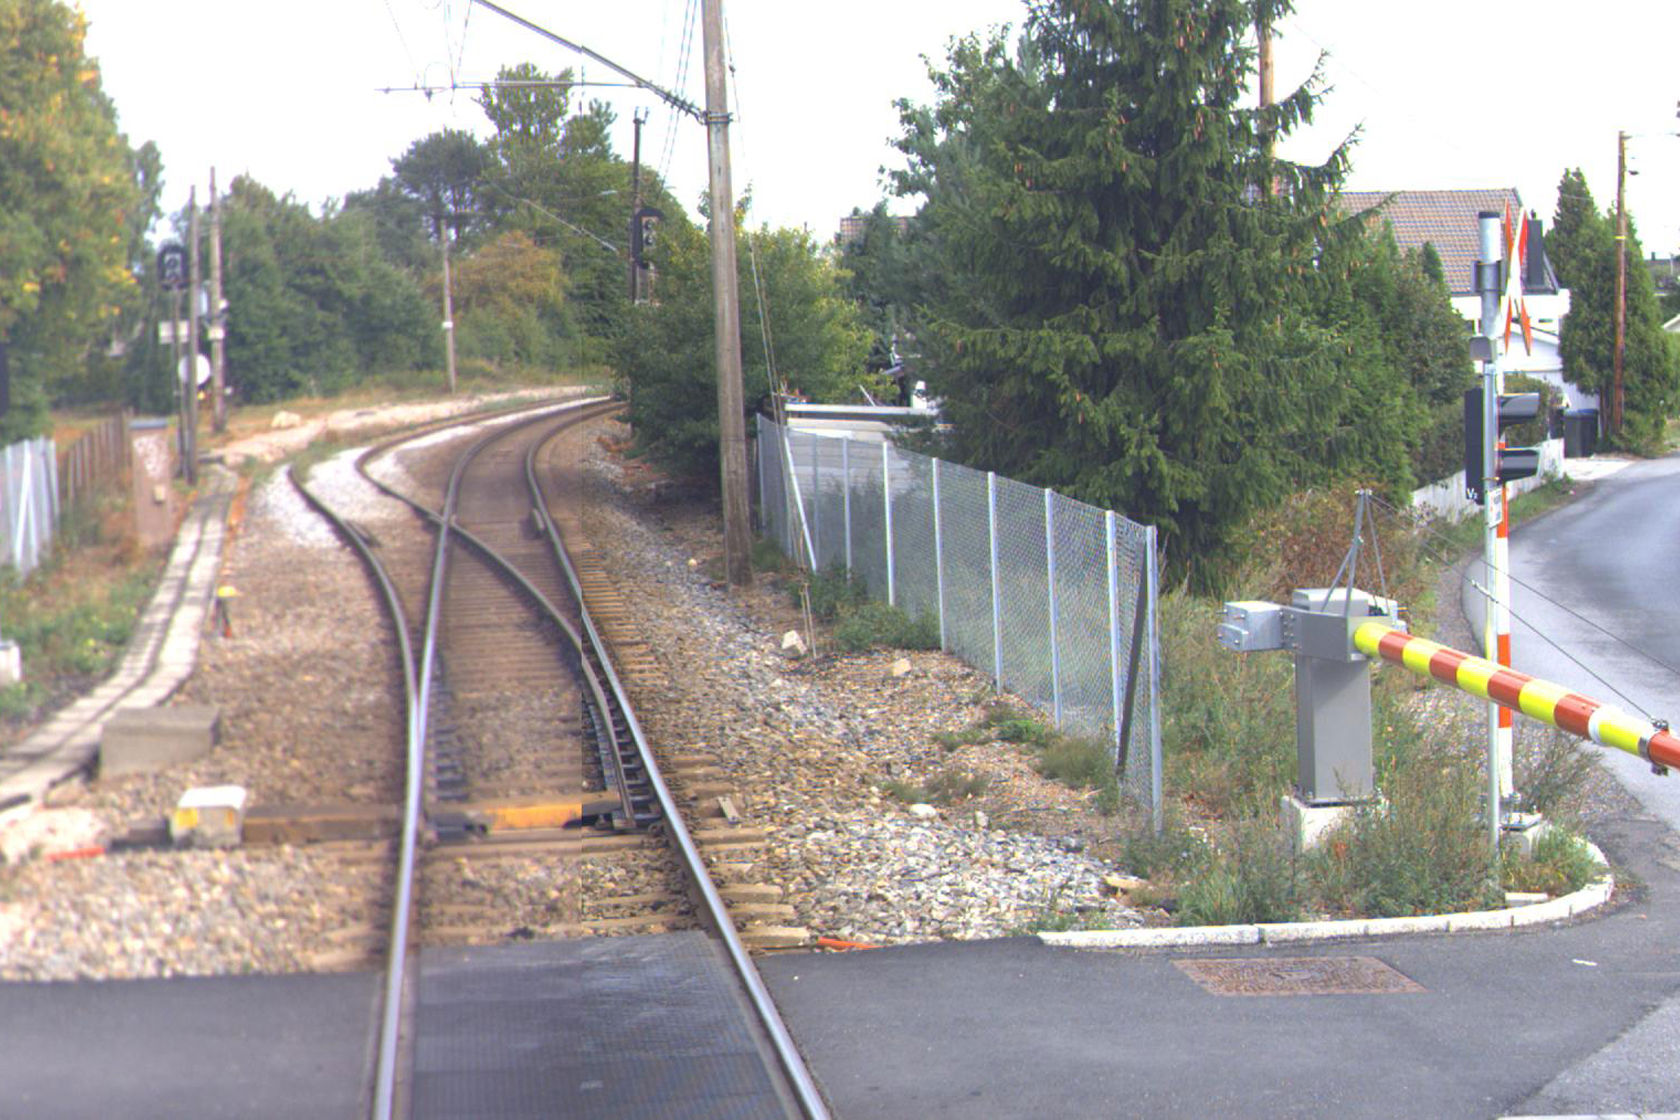 Tracks and level crossing at Lisleby station